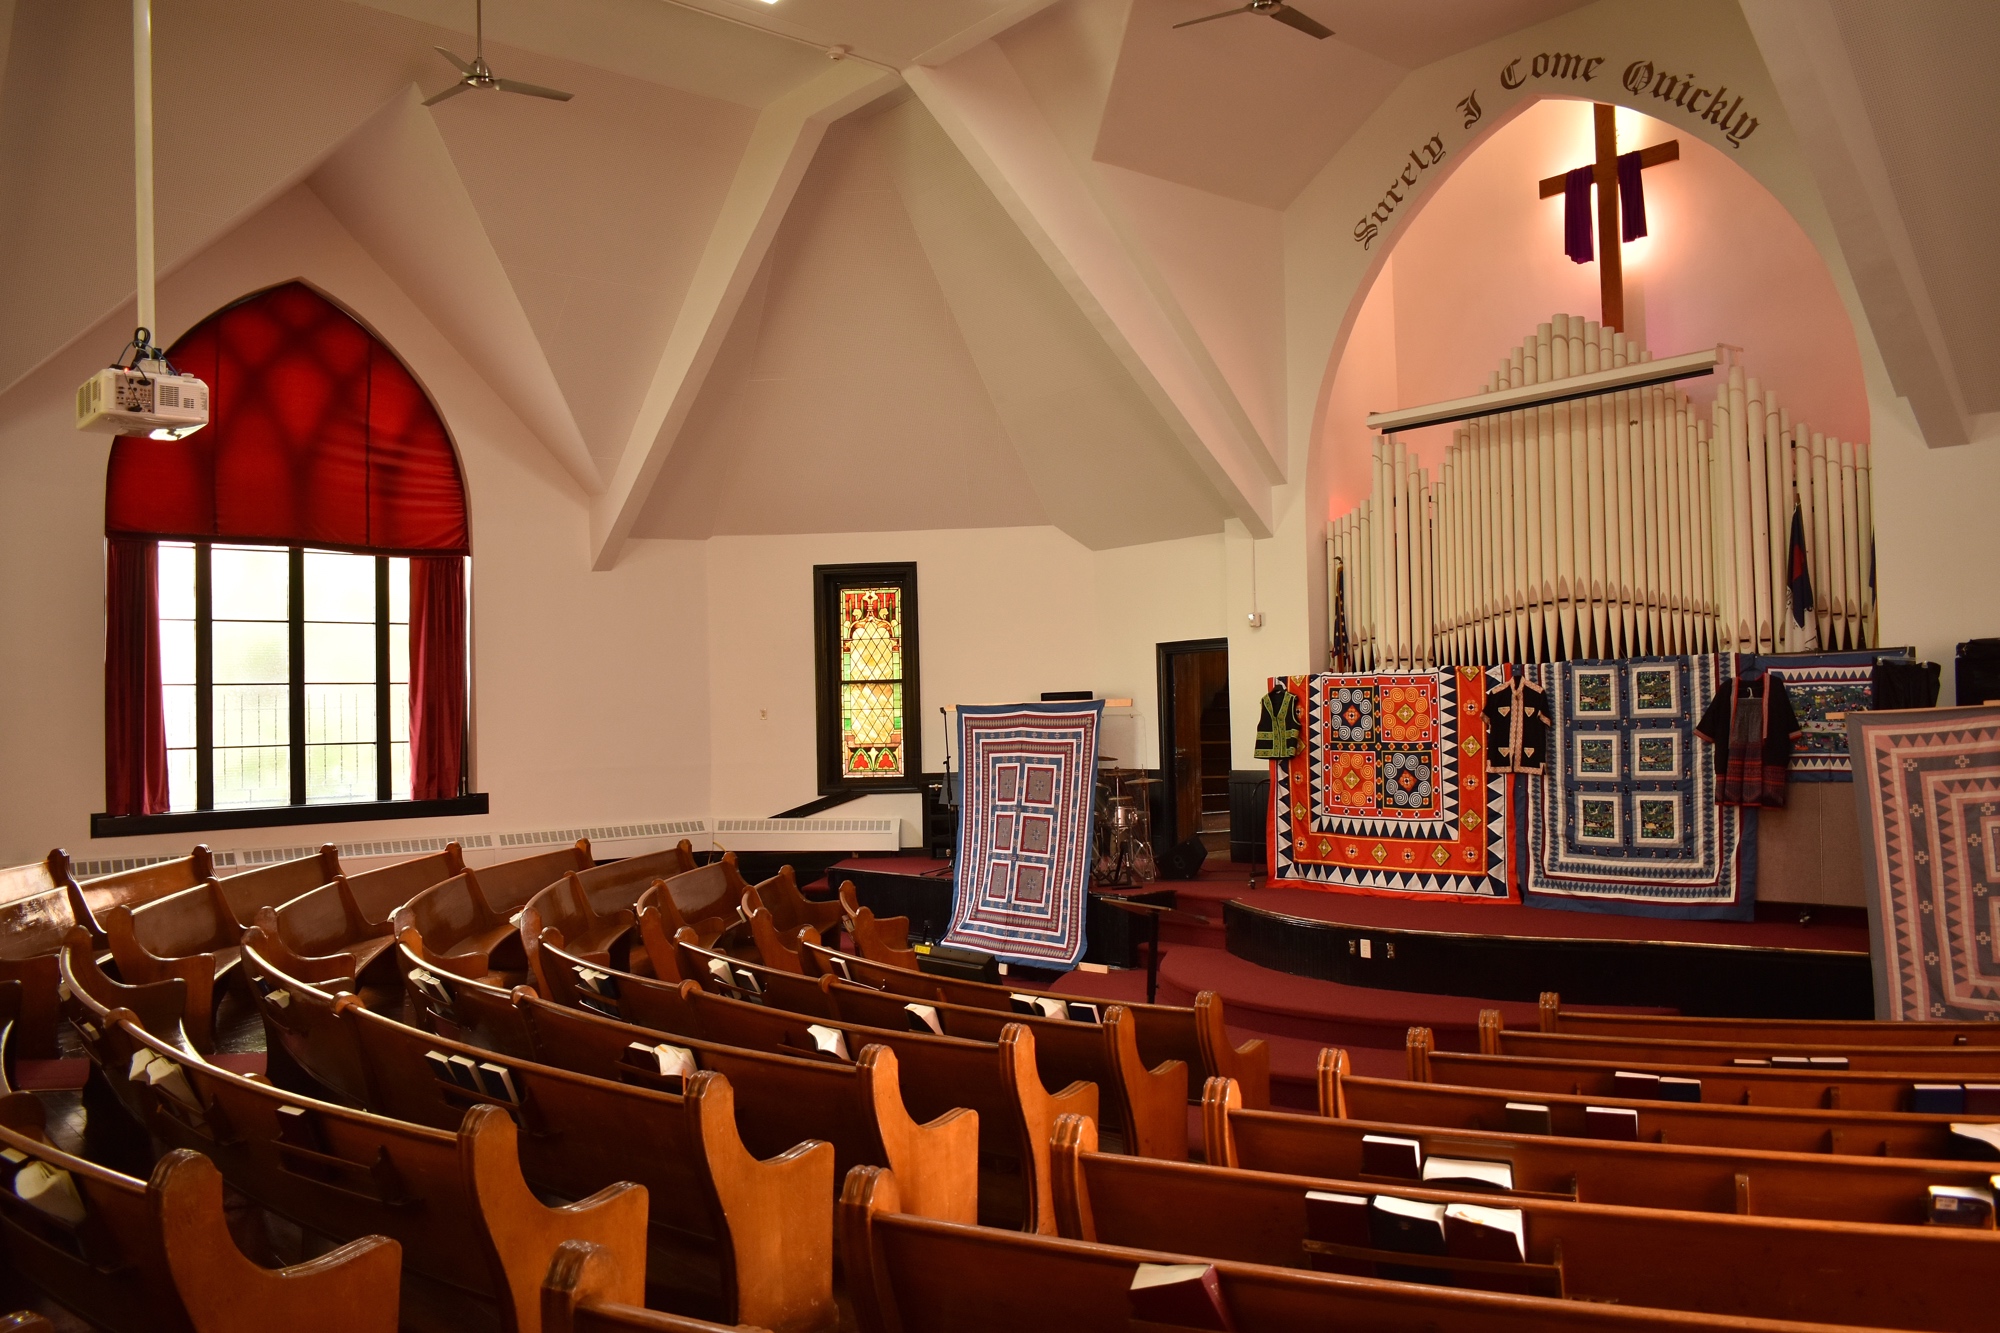  Providence Hmong Church, this year’s House Tour Welcome Center Photo by Clark Schoettle 